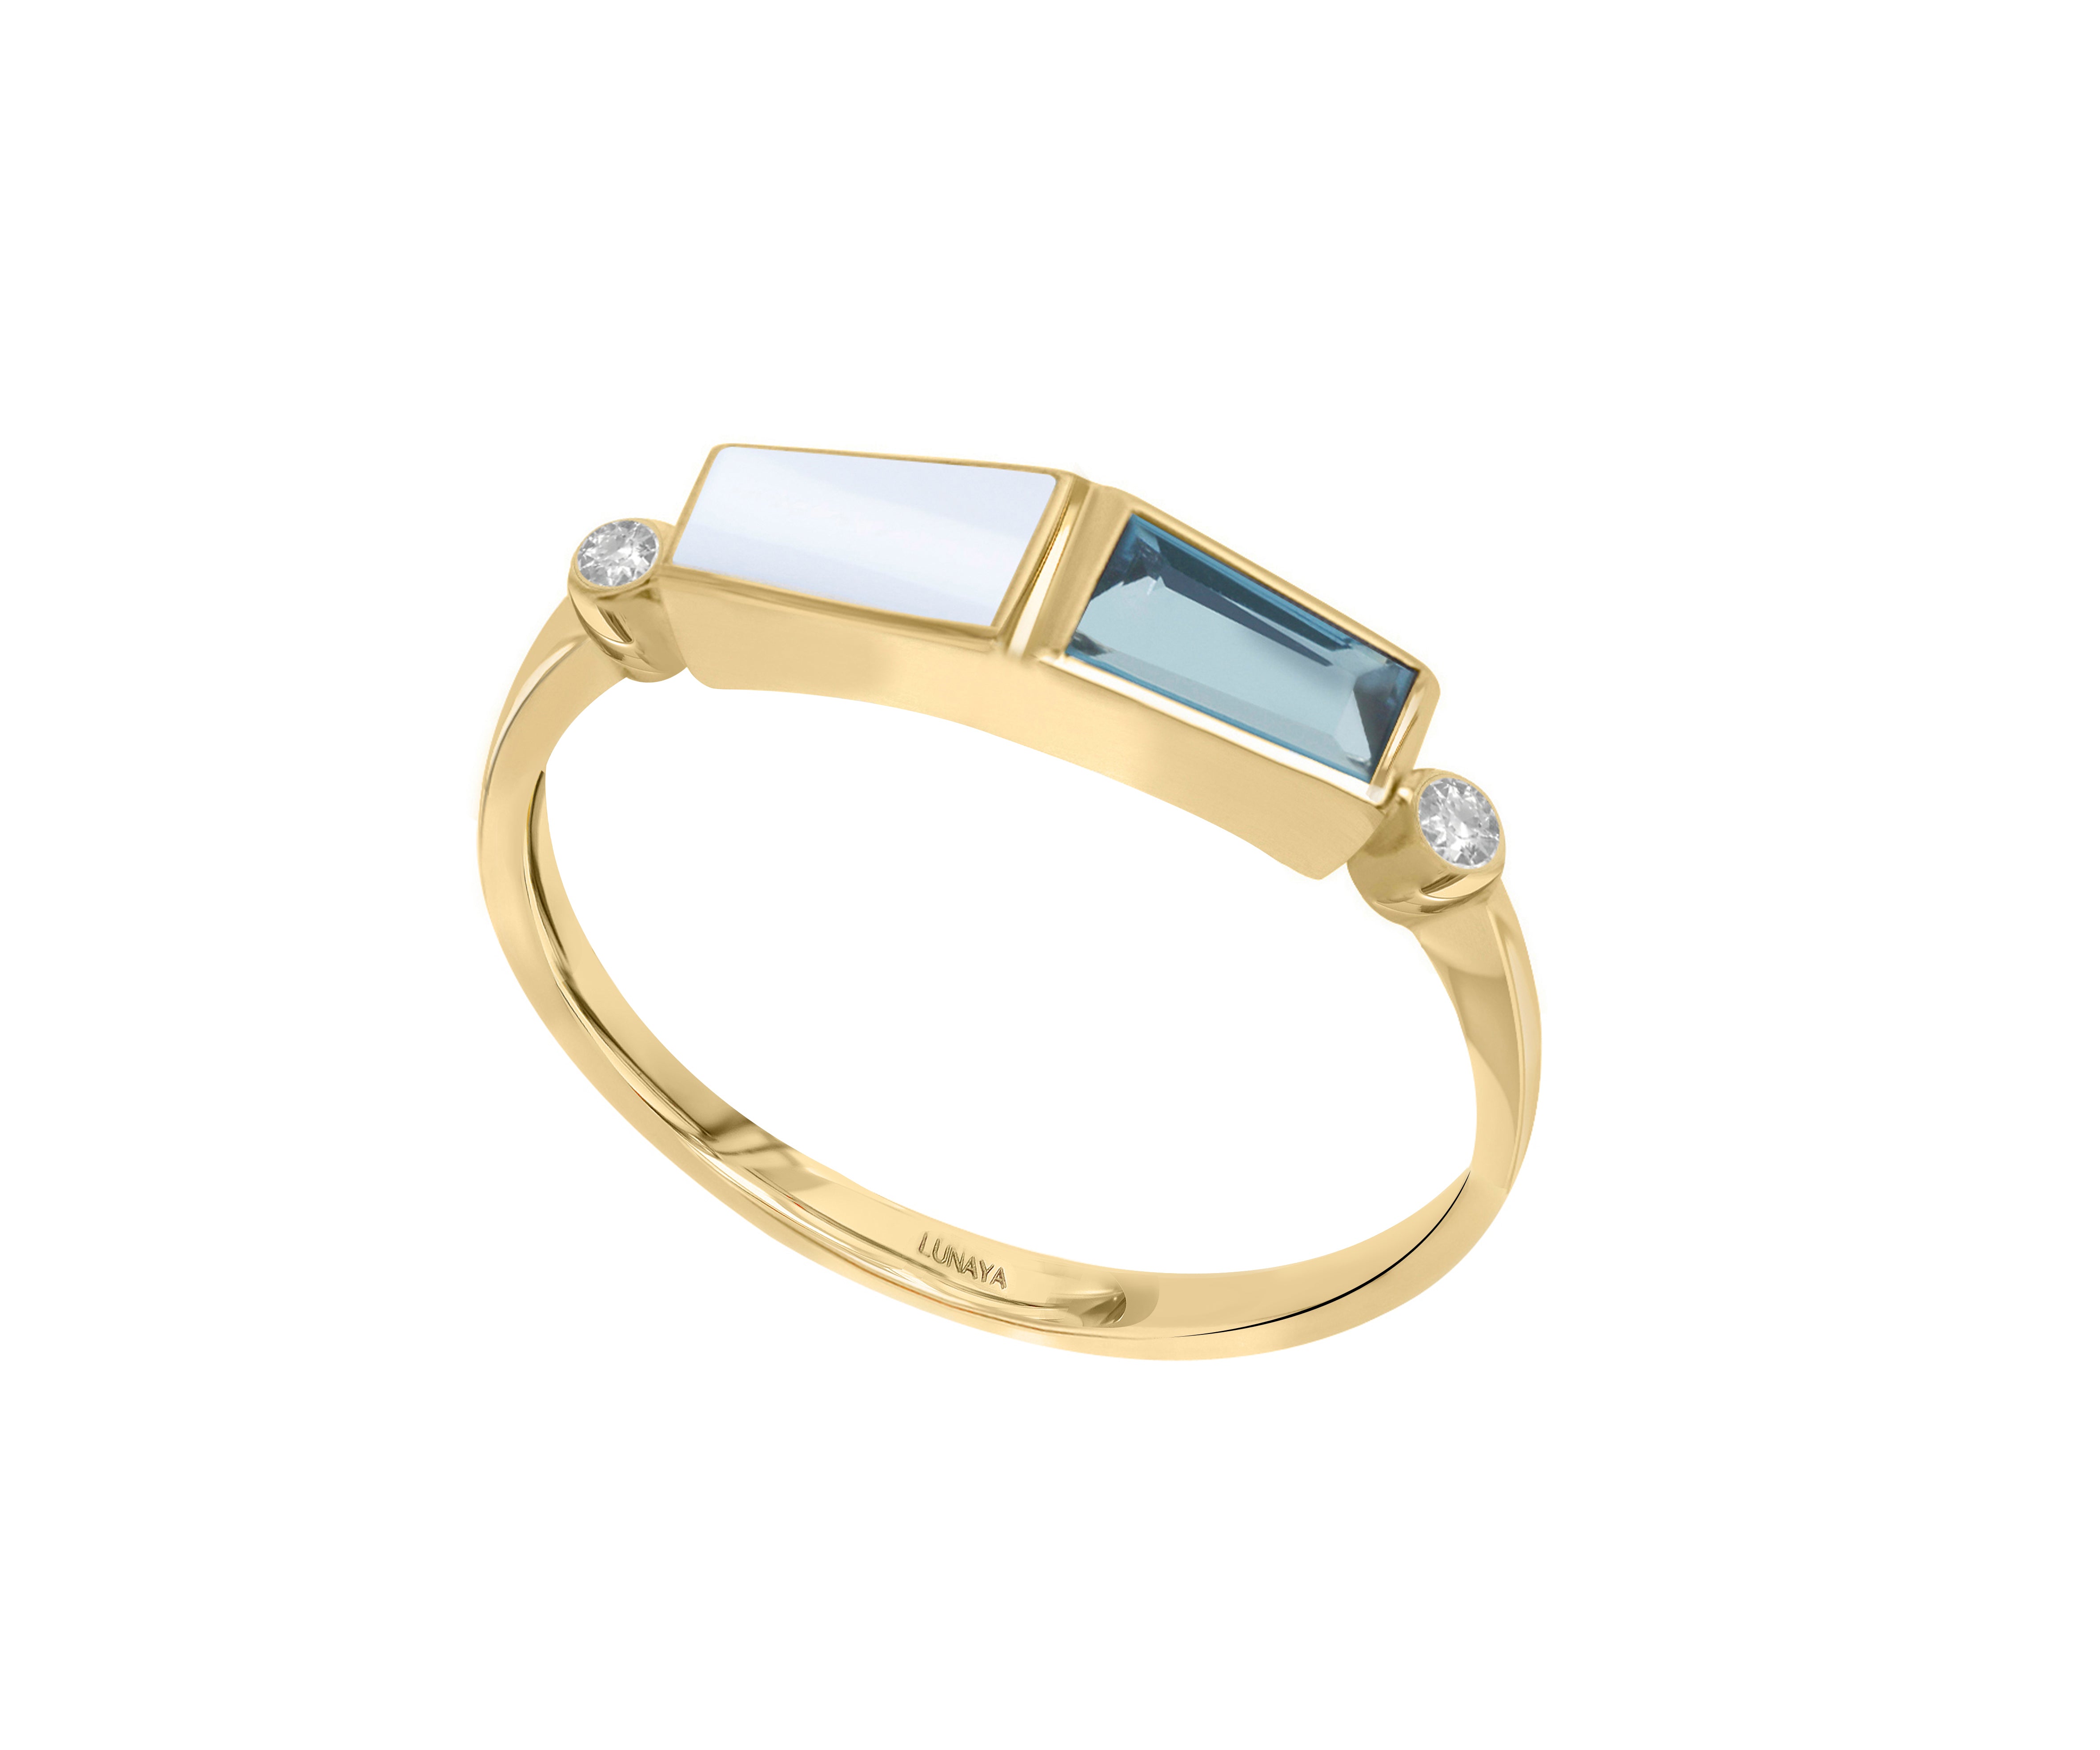 Tailored Baguette Ring